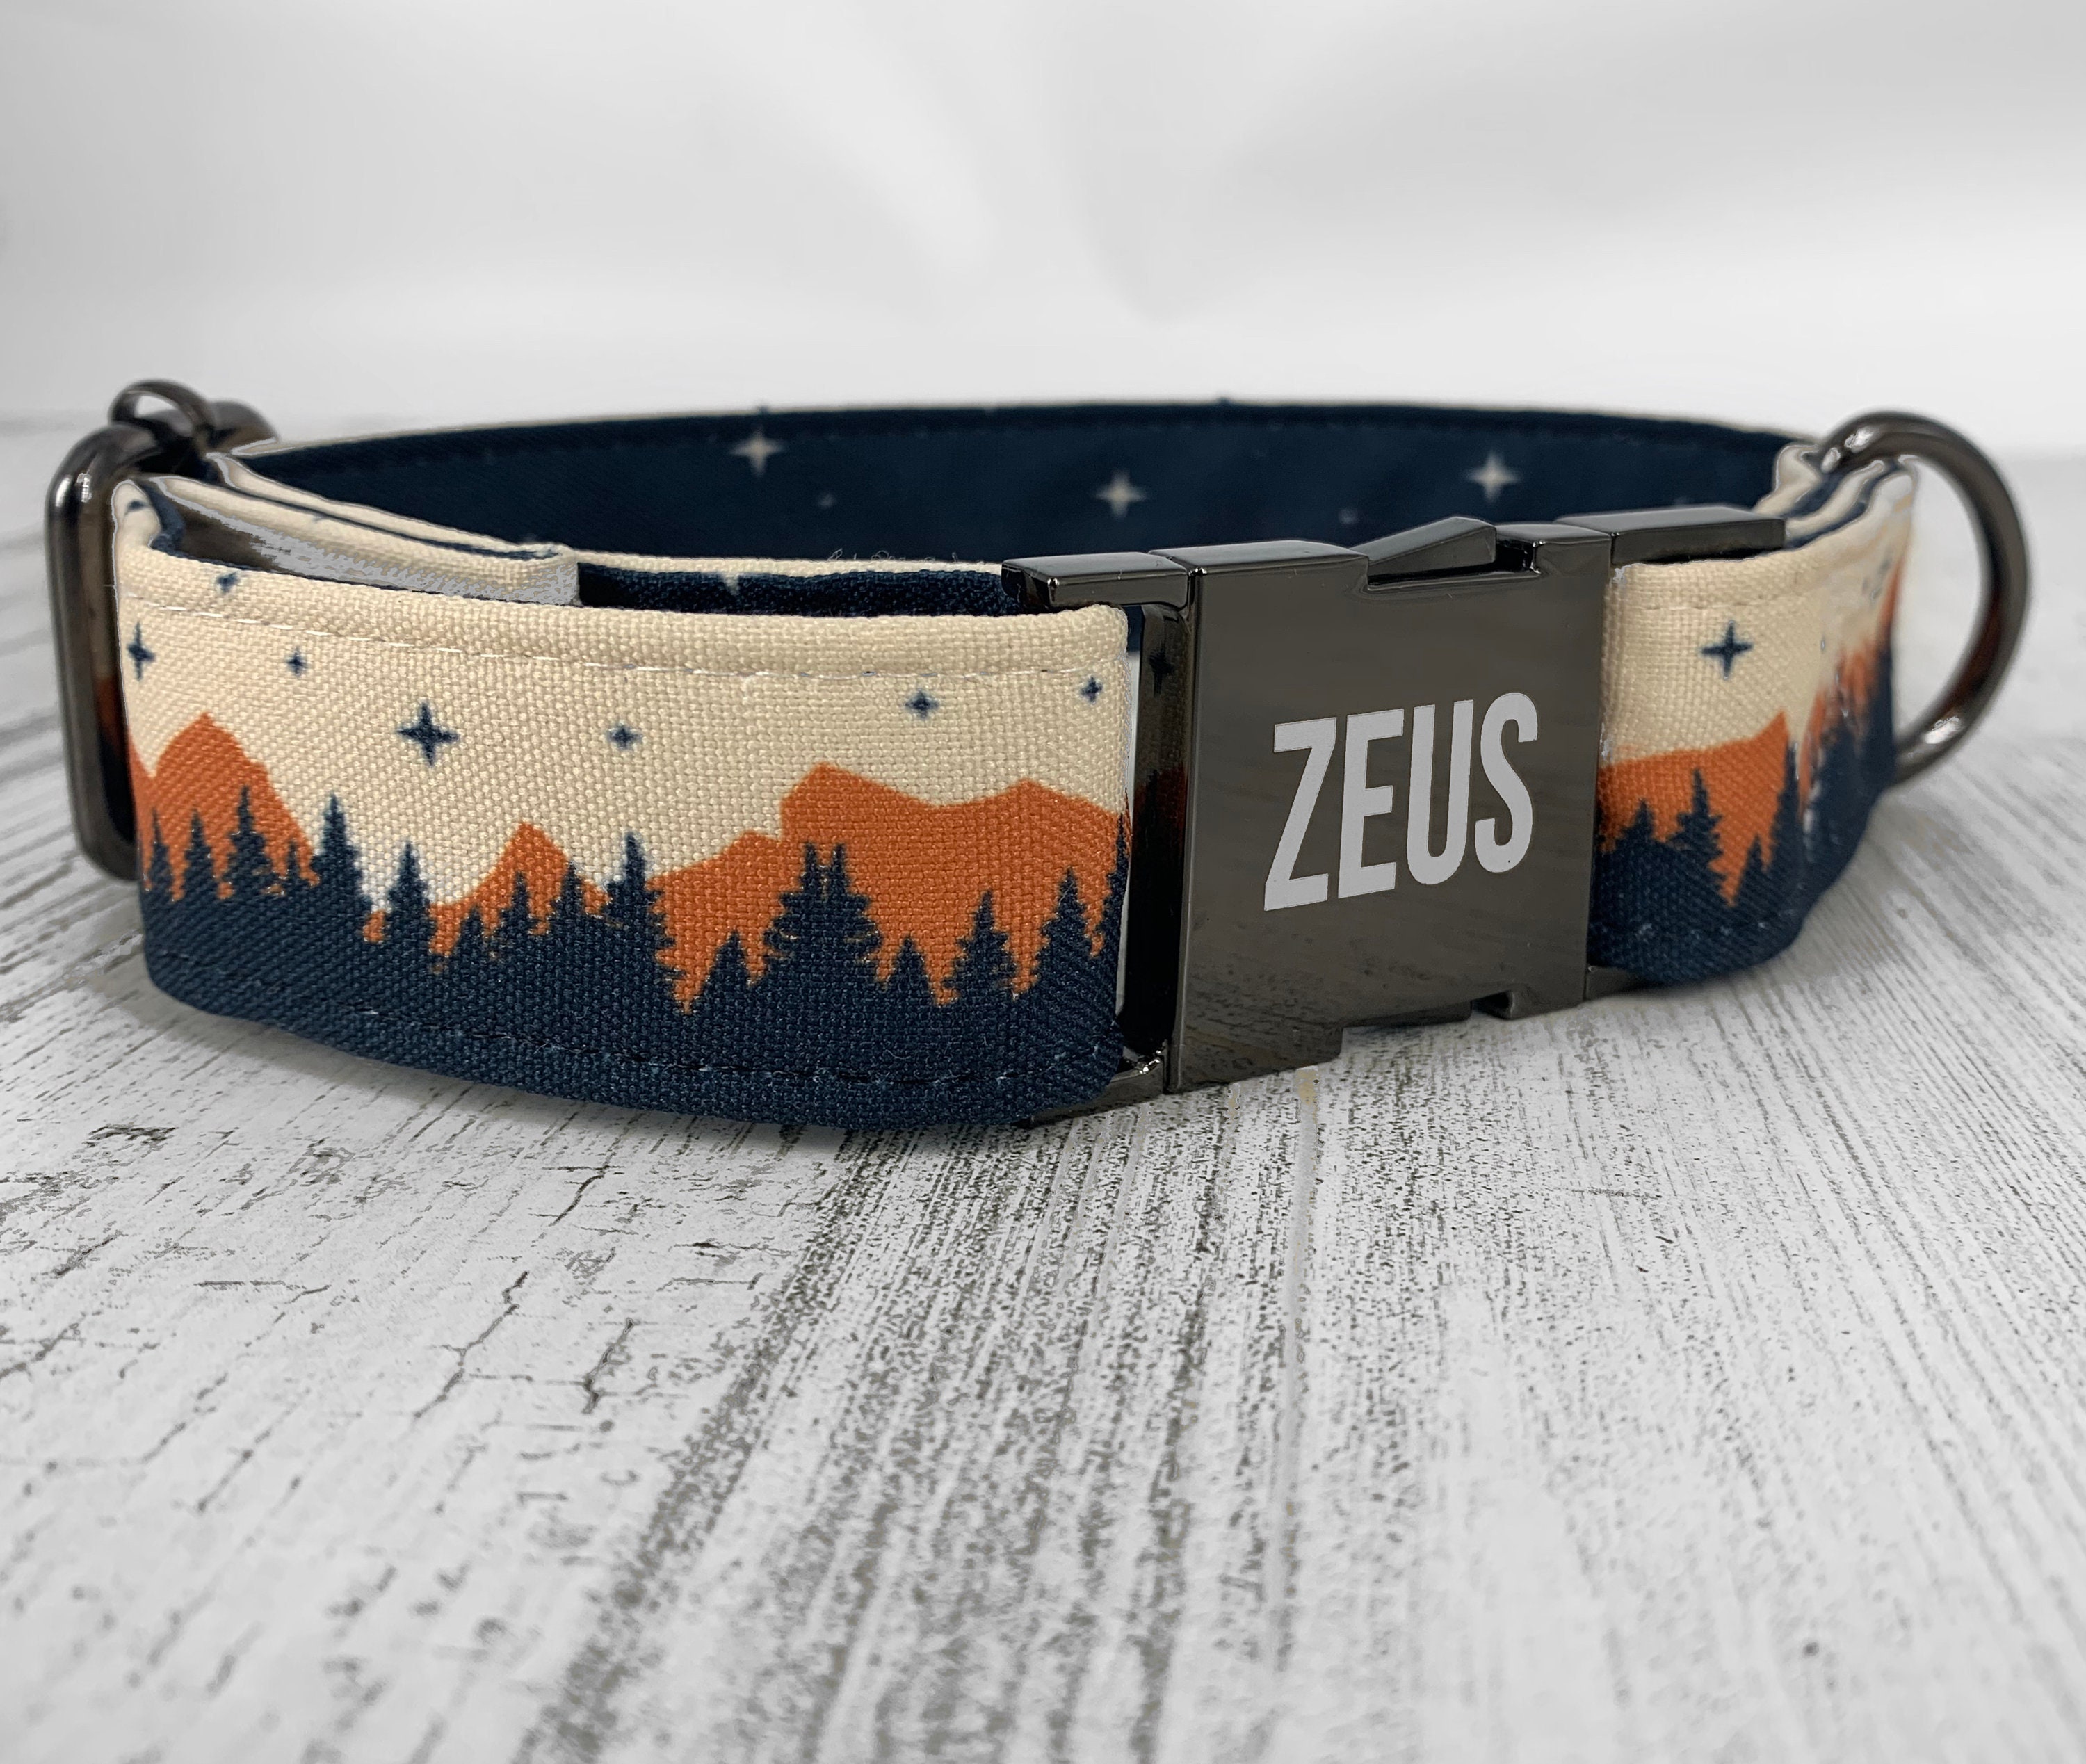 Personalized Dog Collars with Metal Buckle - Custom Pet Name Tags for Small  Medium Large Boys and Girls Breeds